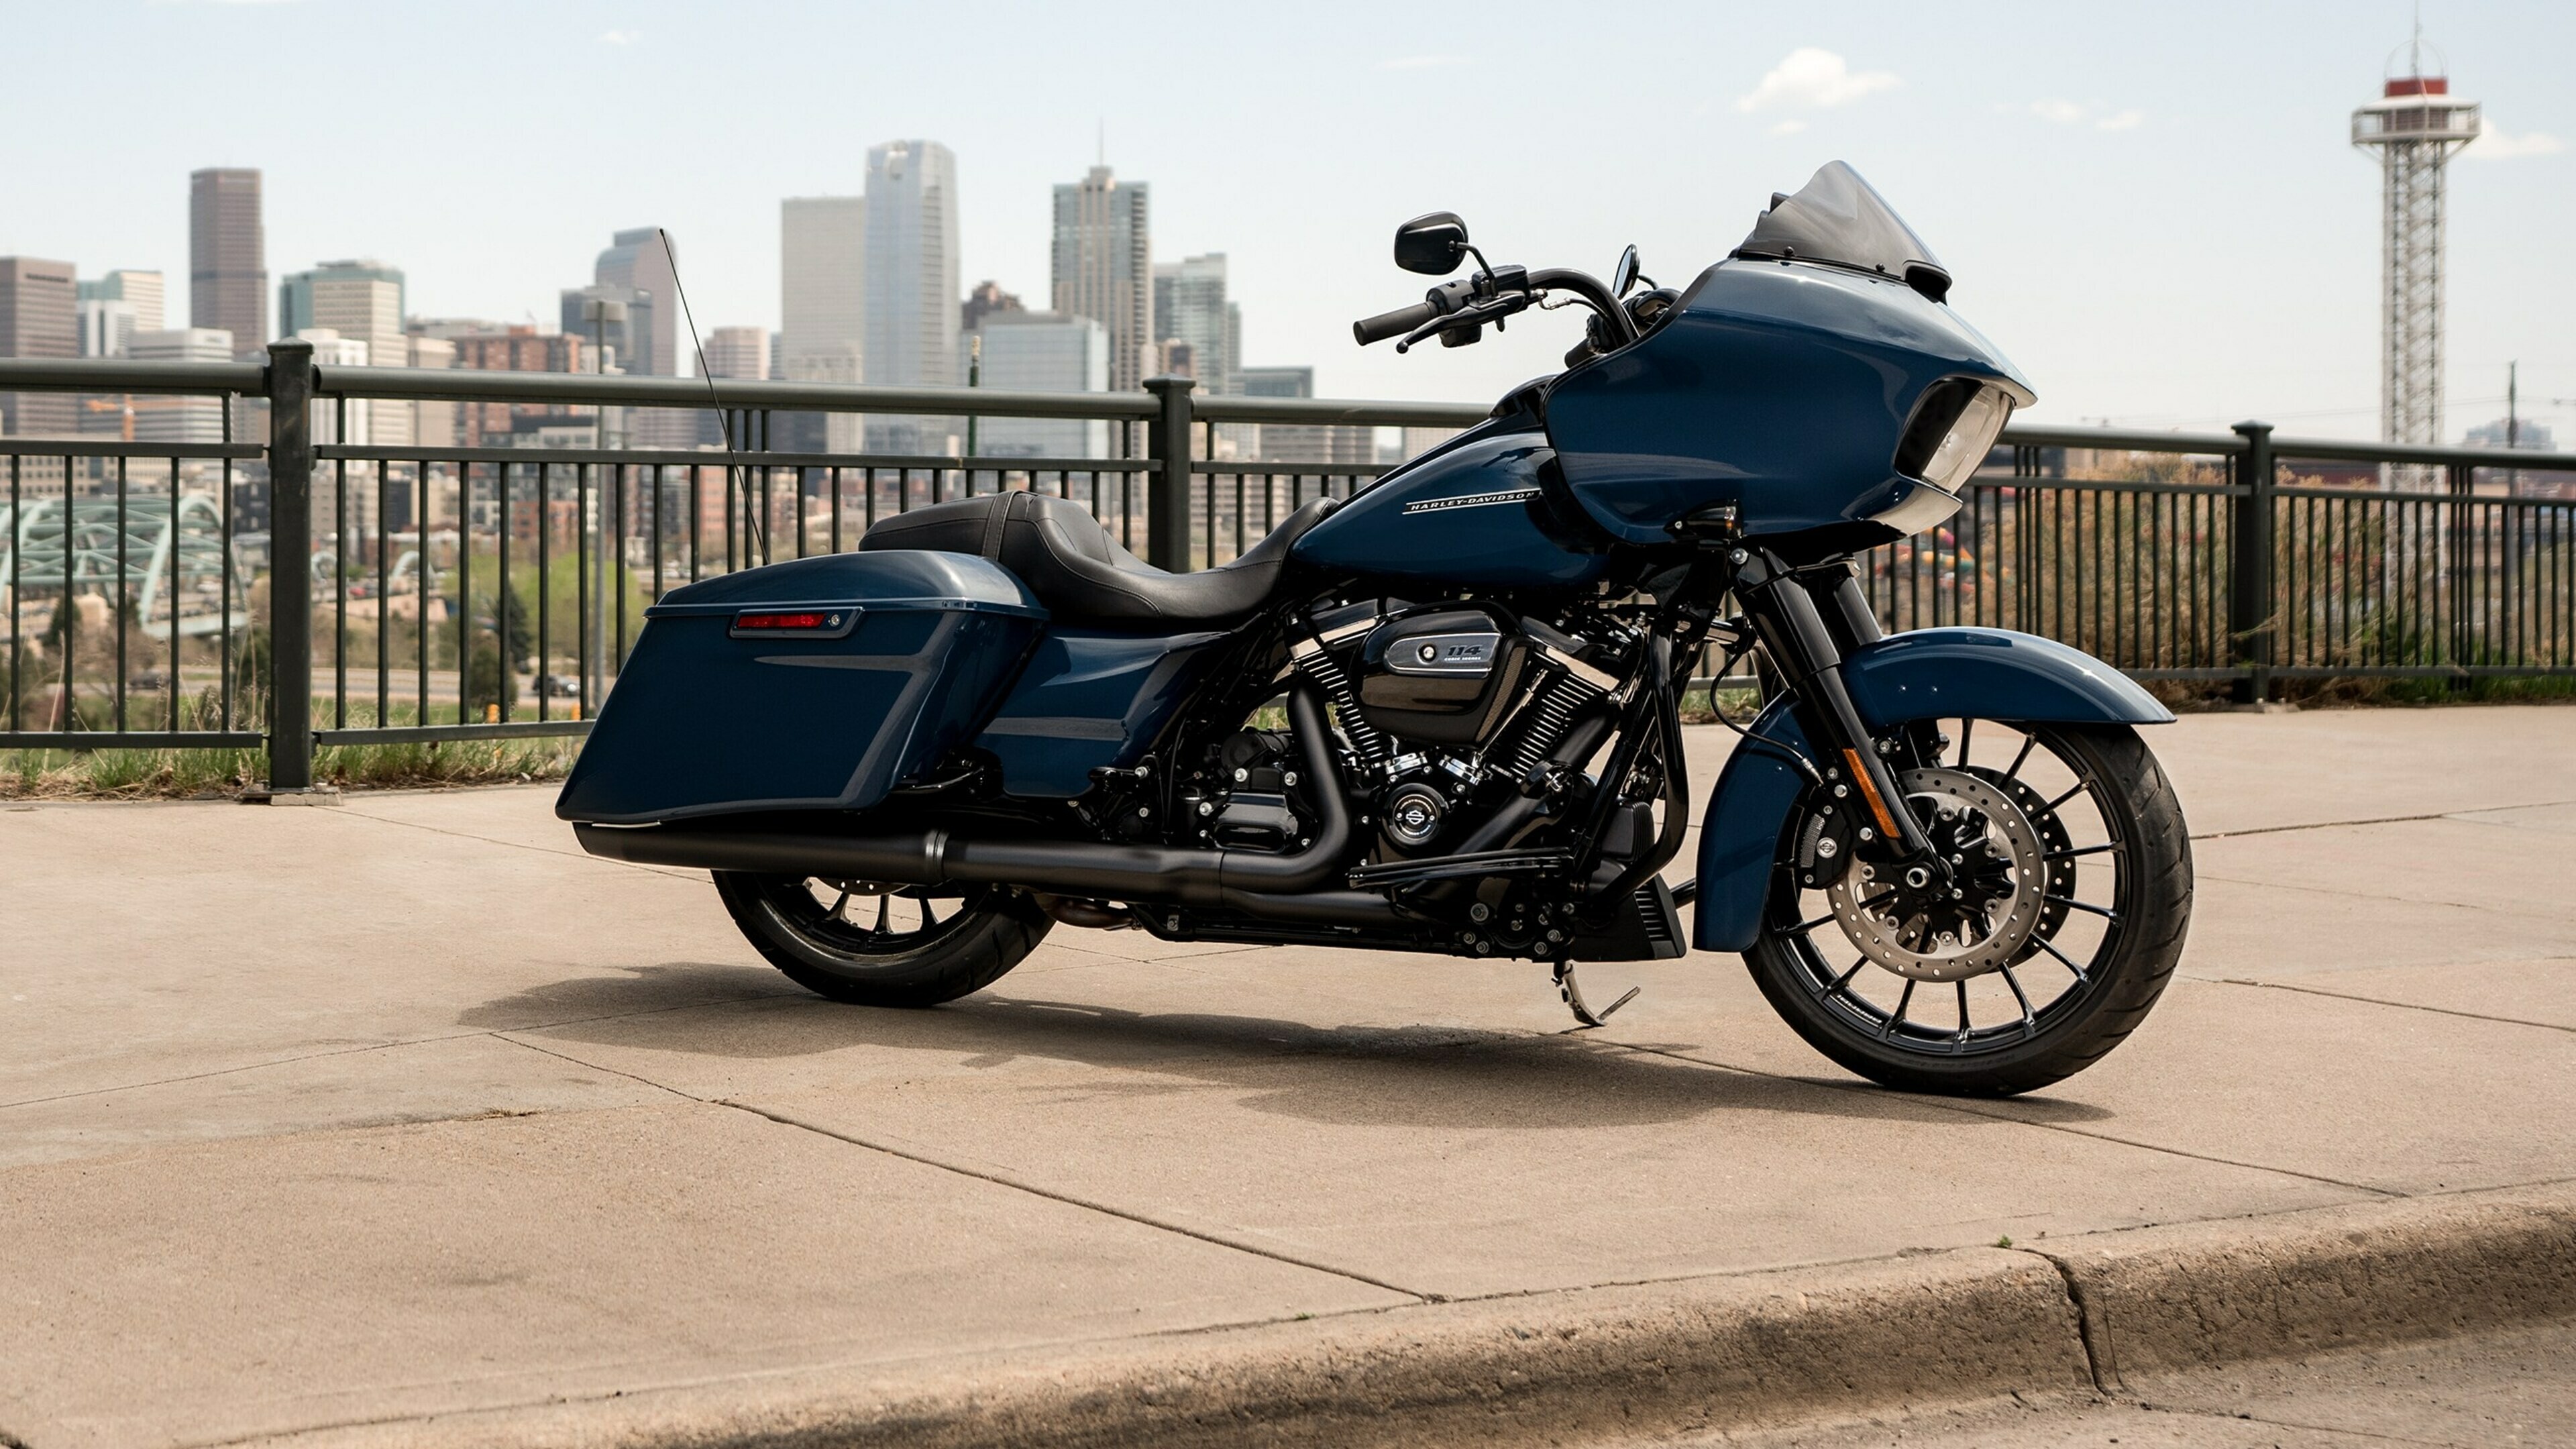 Harley-Davidson Glide: 2019 H-D model, Road Glide, The preferred touring model for customizing. 3840x2160 4K Background.